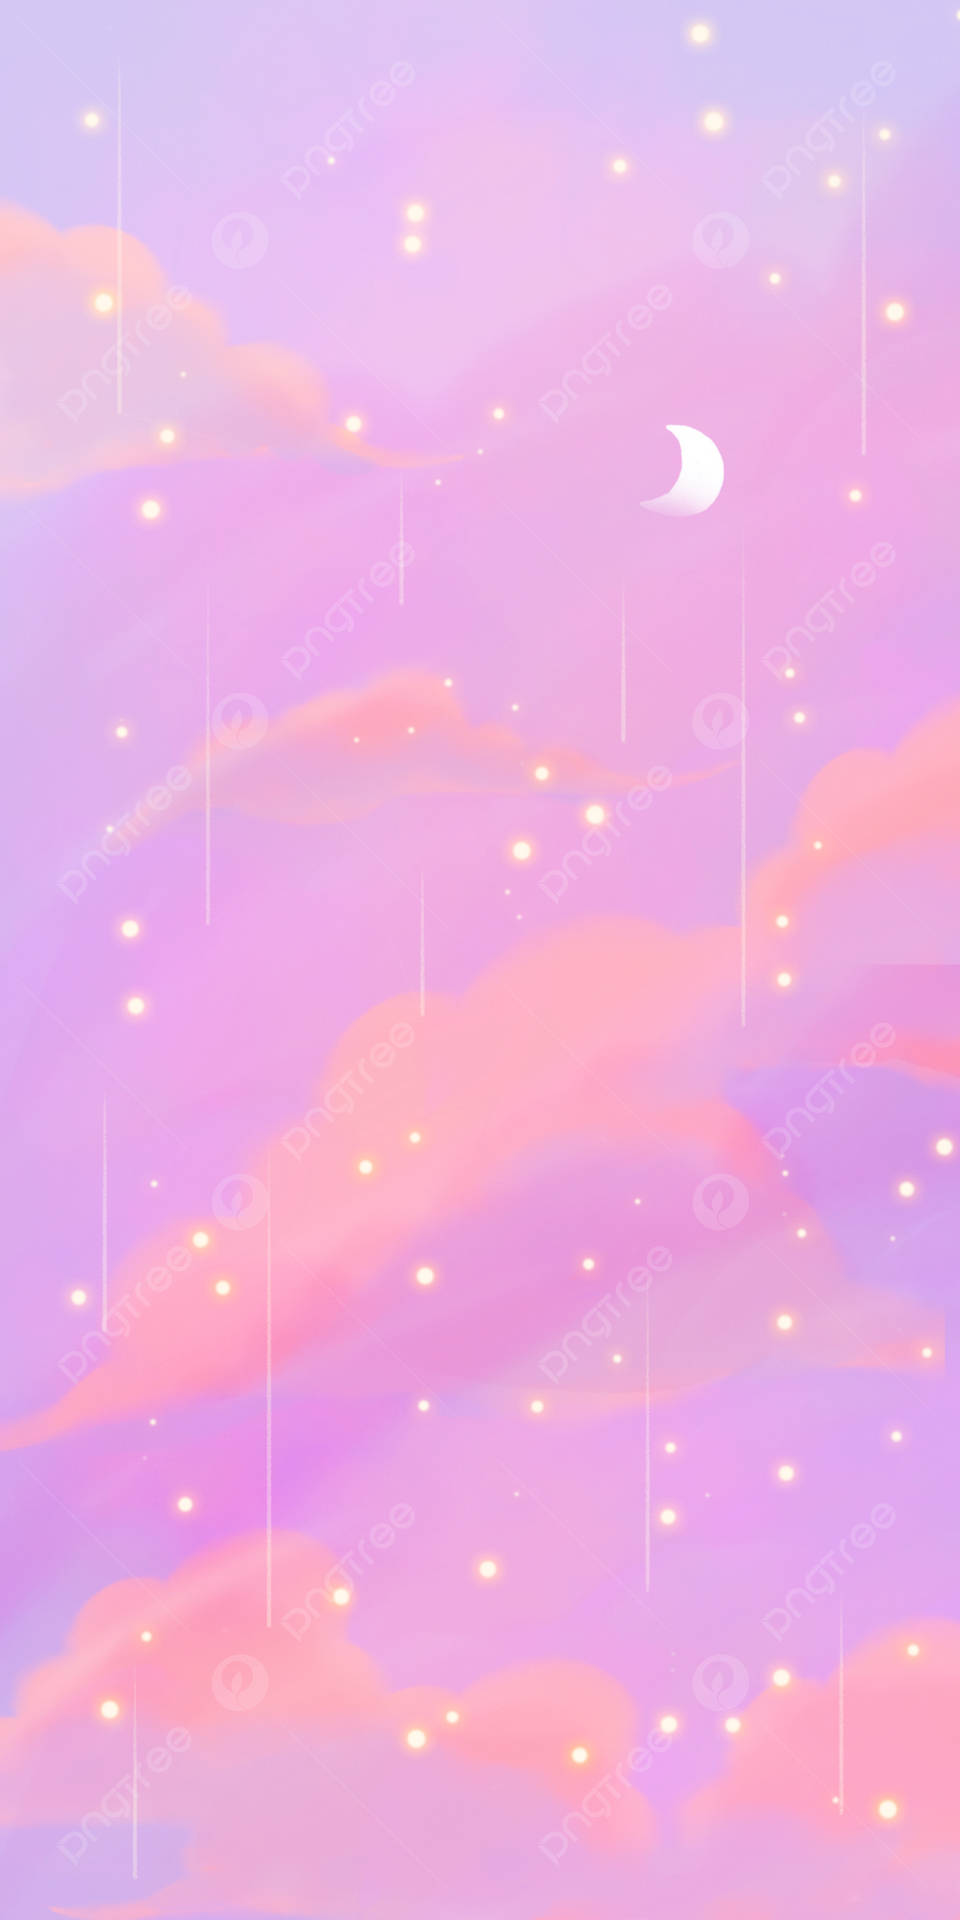 Clouds And Stars In The Sky Wallpaper